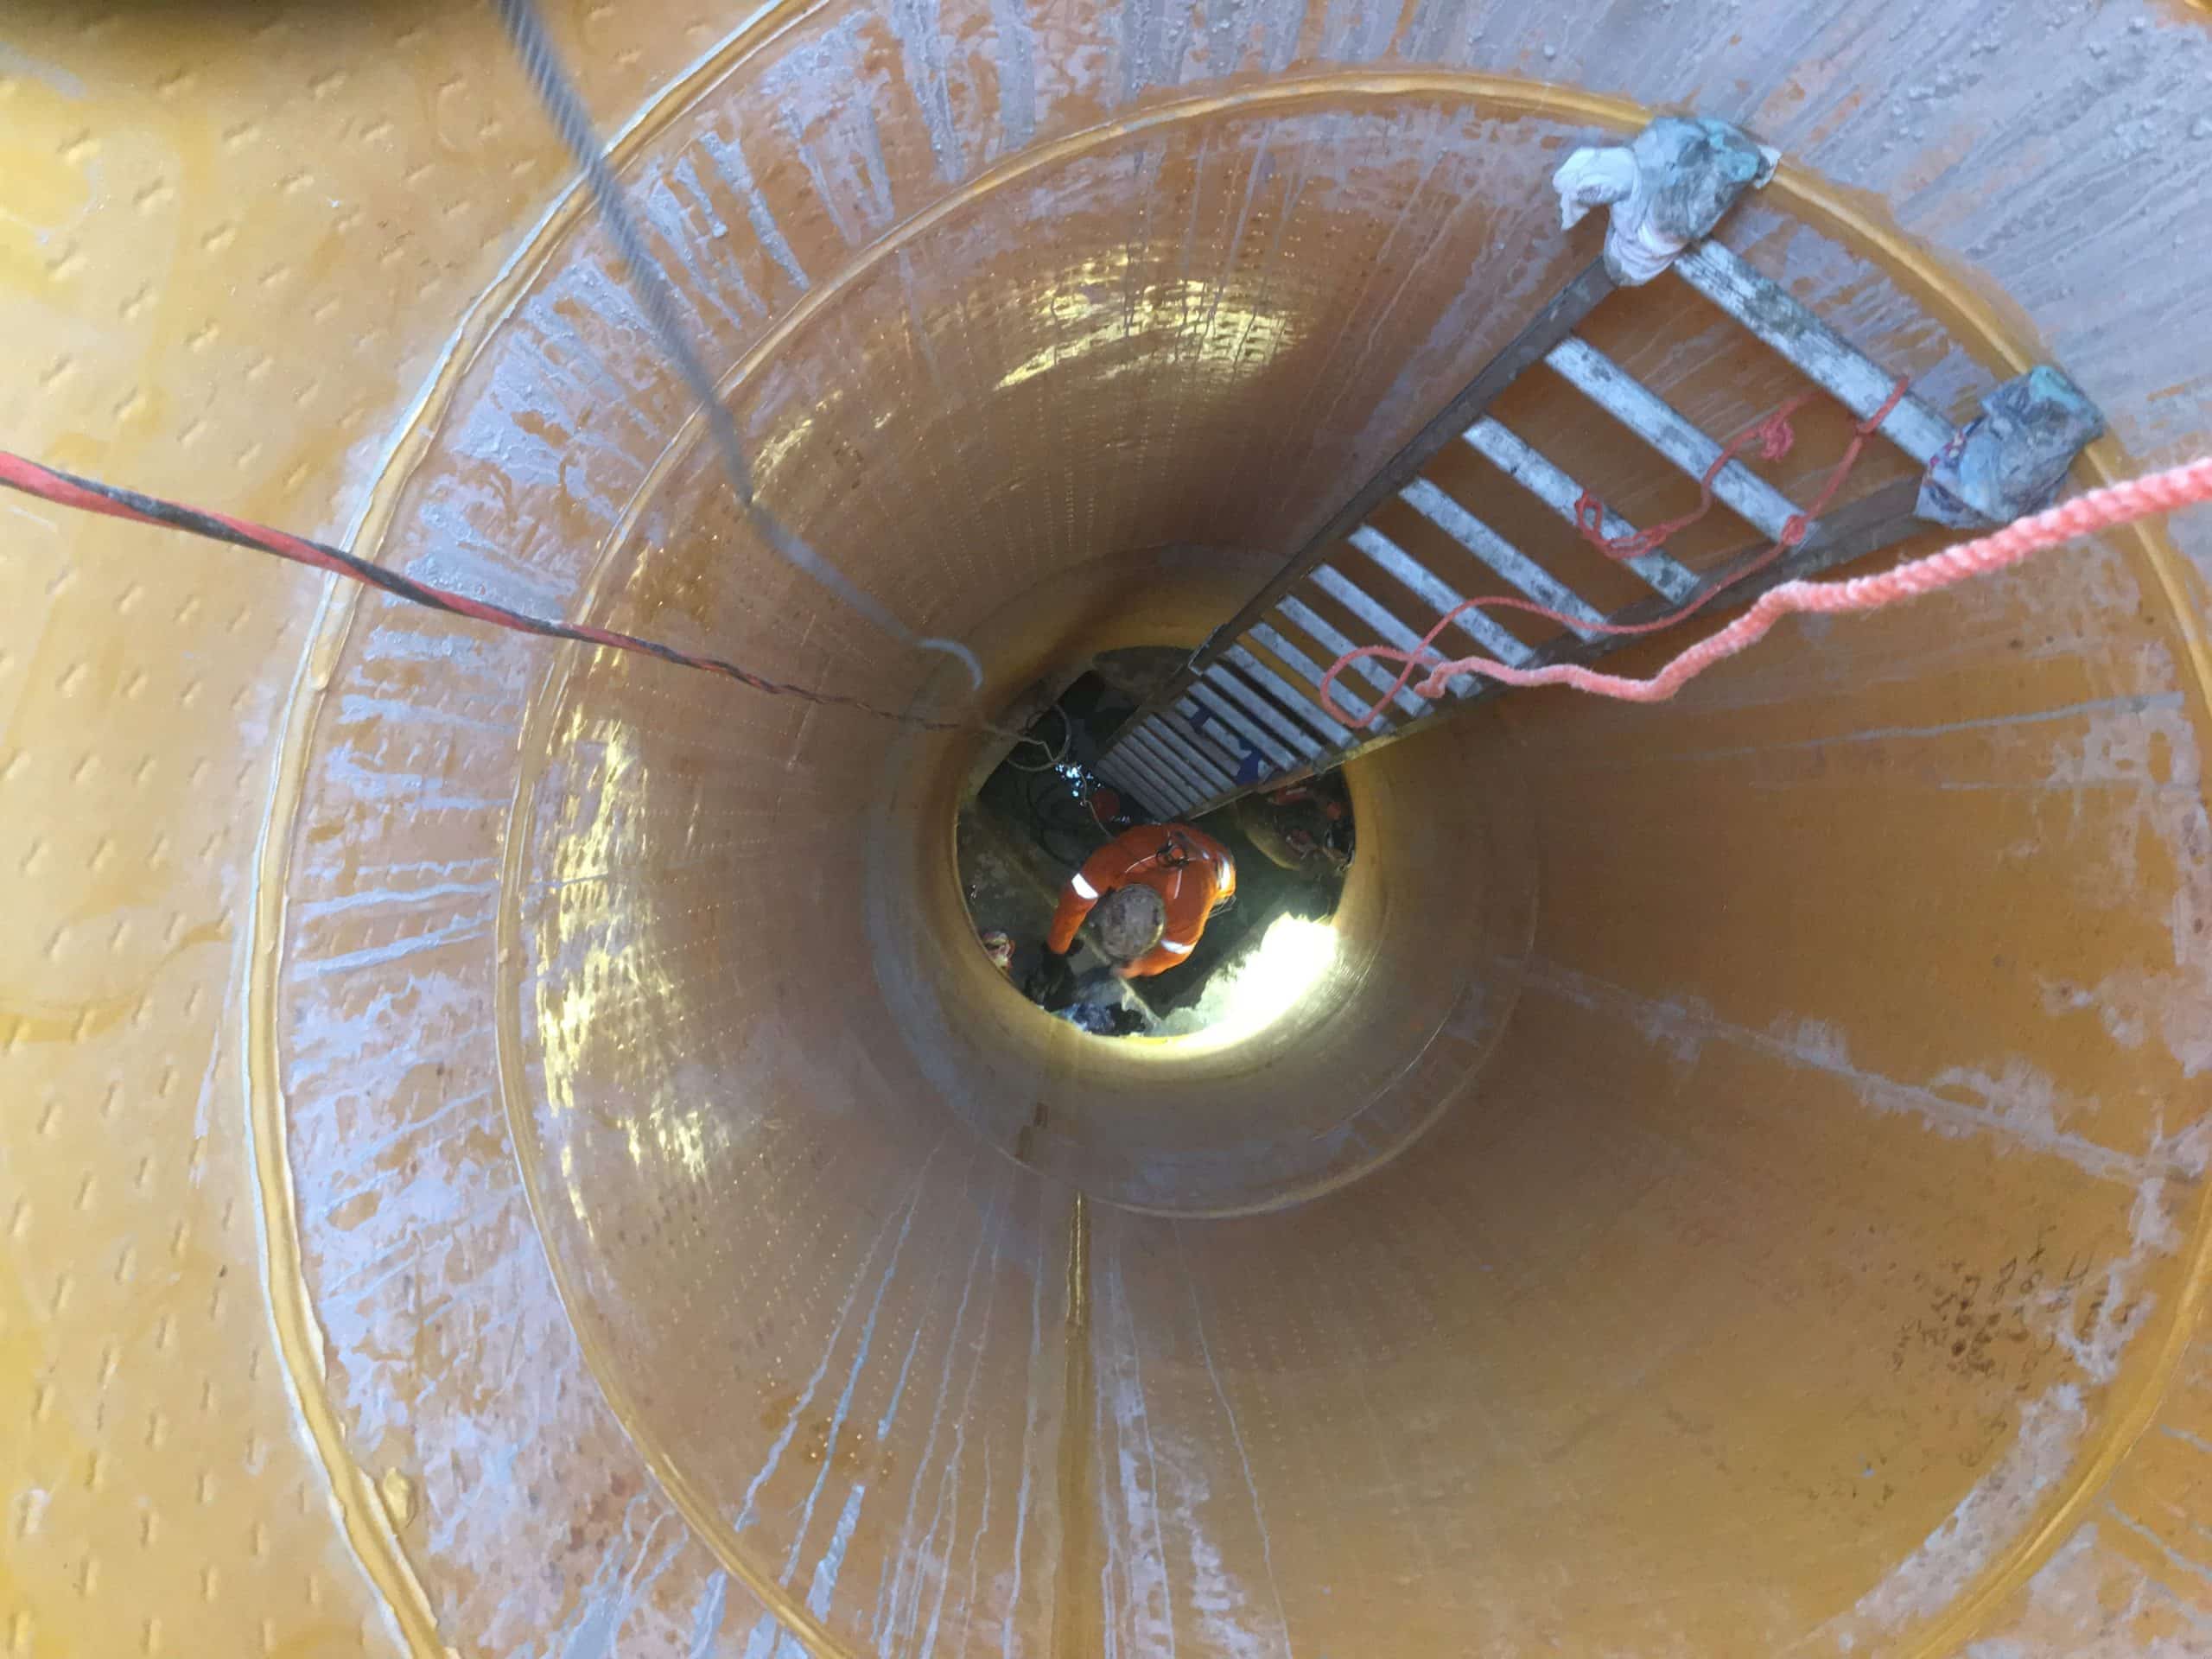 Leak sealing injections to concrete pipe with HDPE liner - Waterstop Solutions